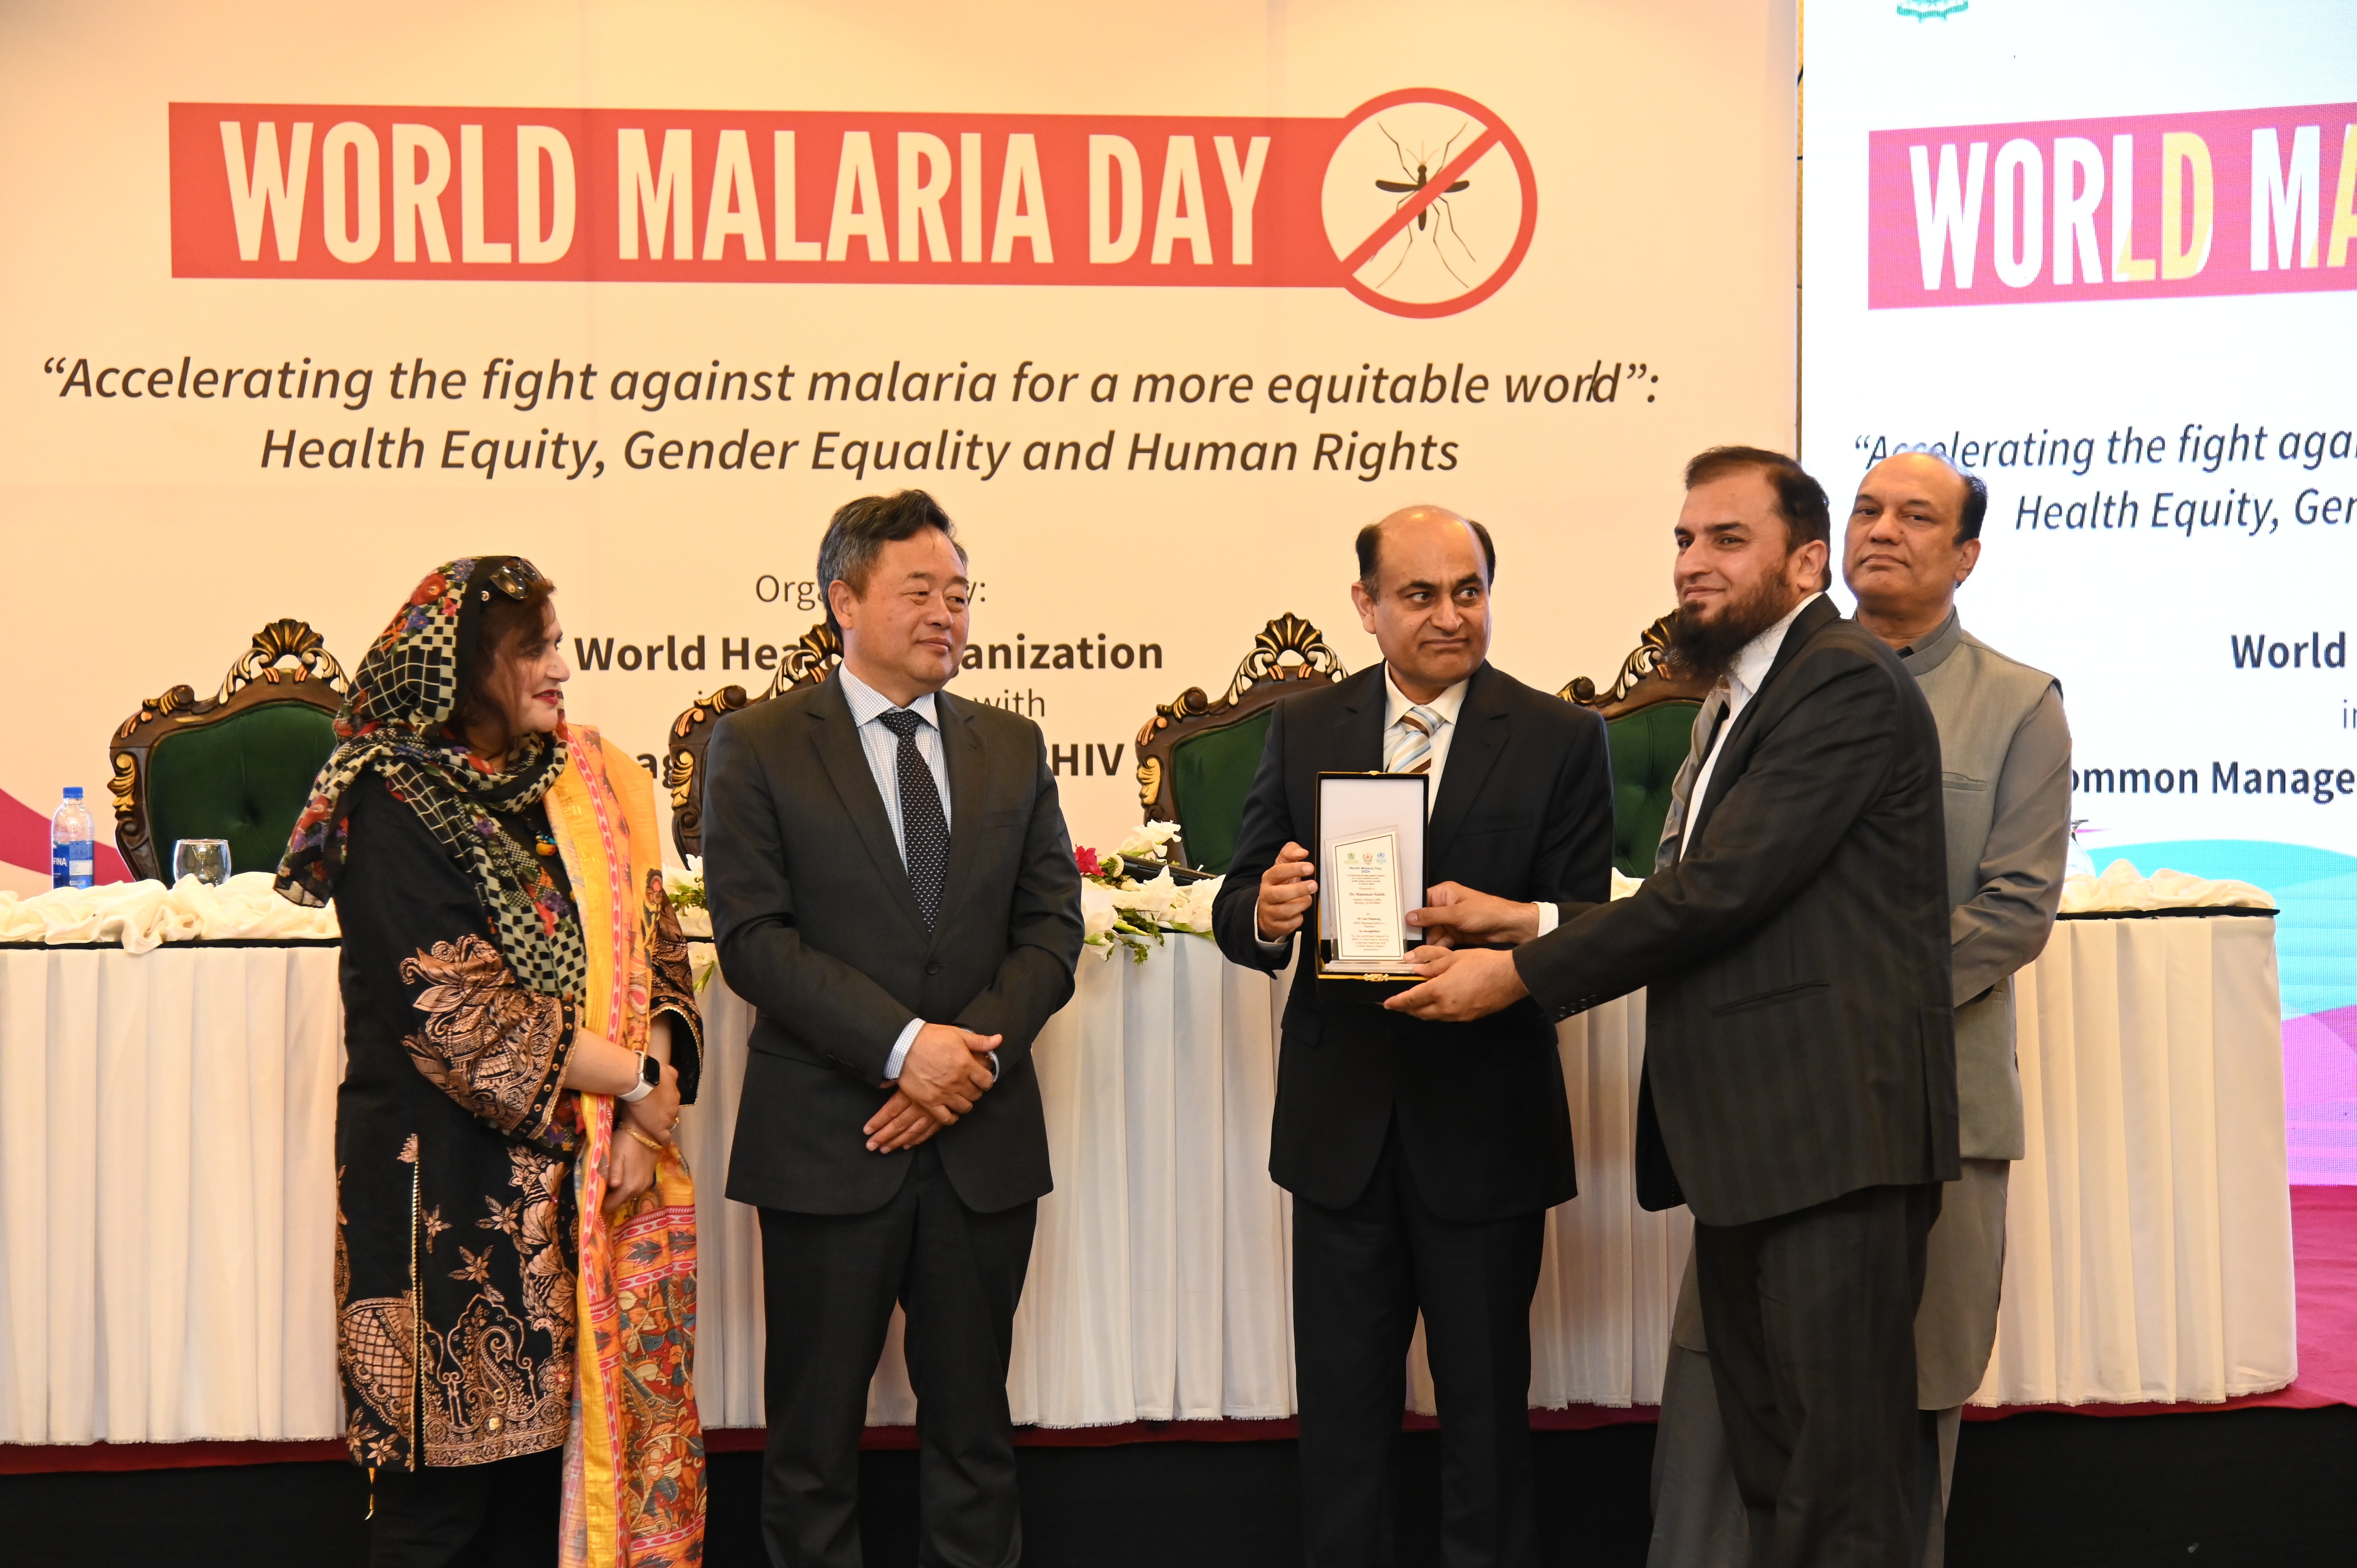 The shield distribution at the event of World Malaria Day 2033